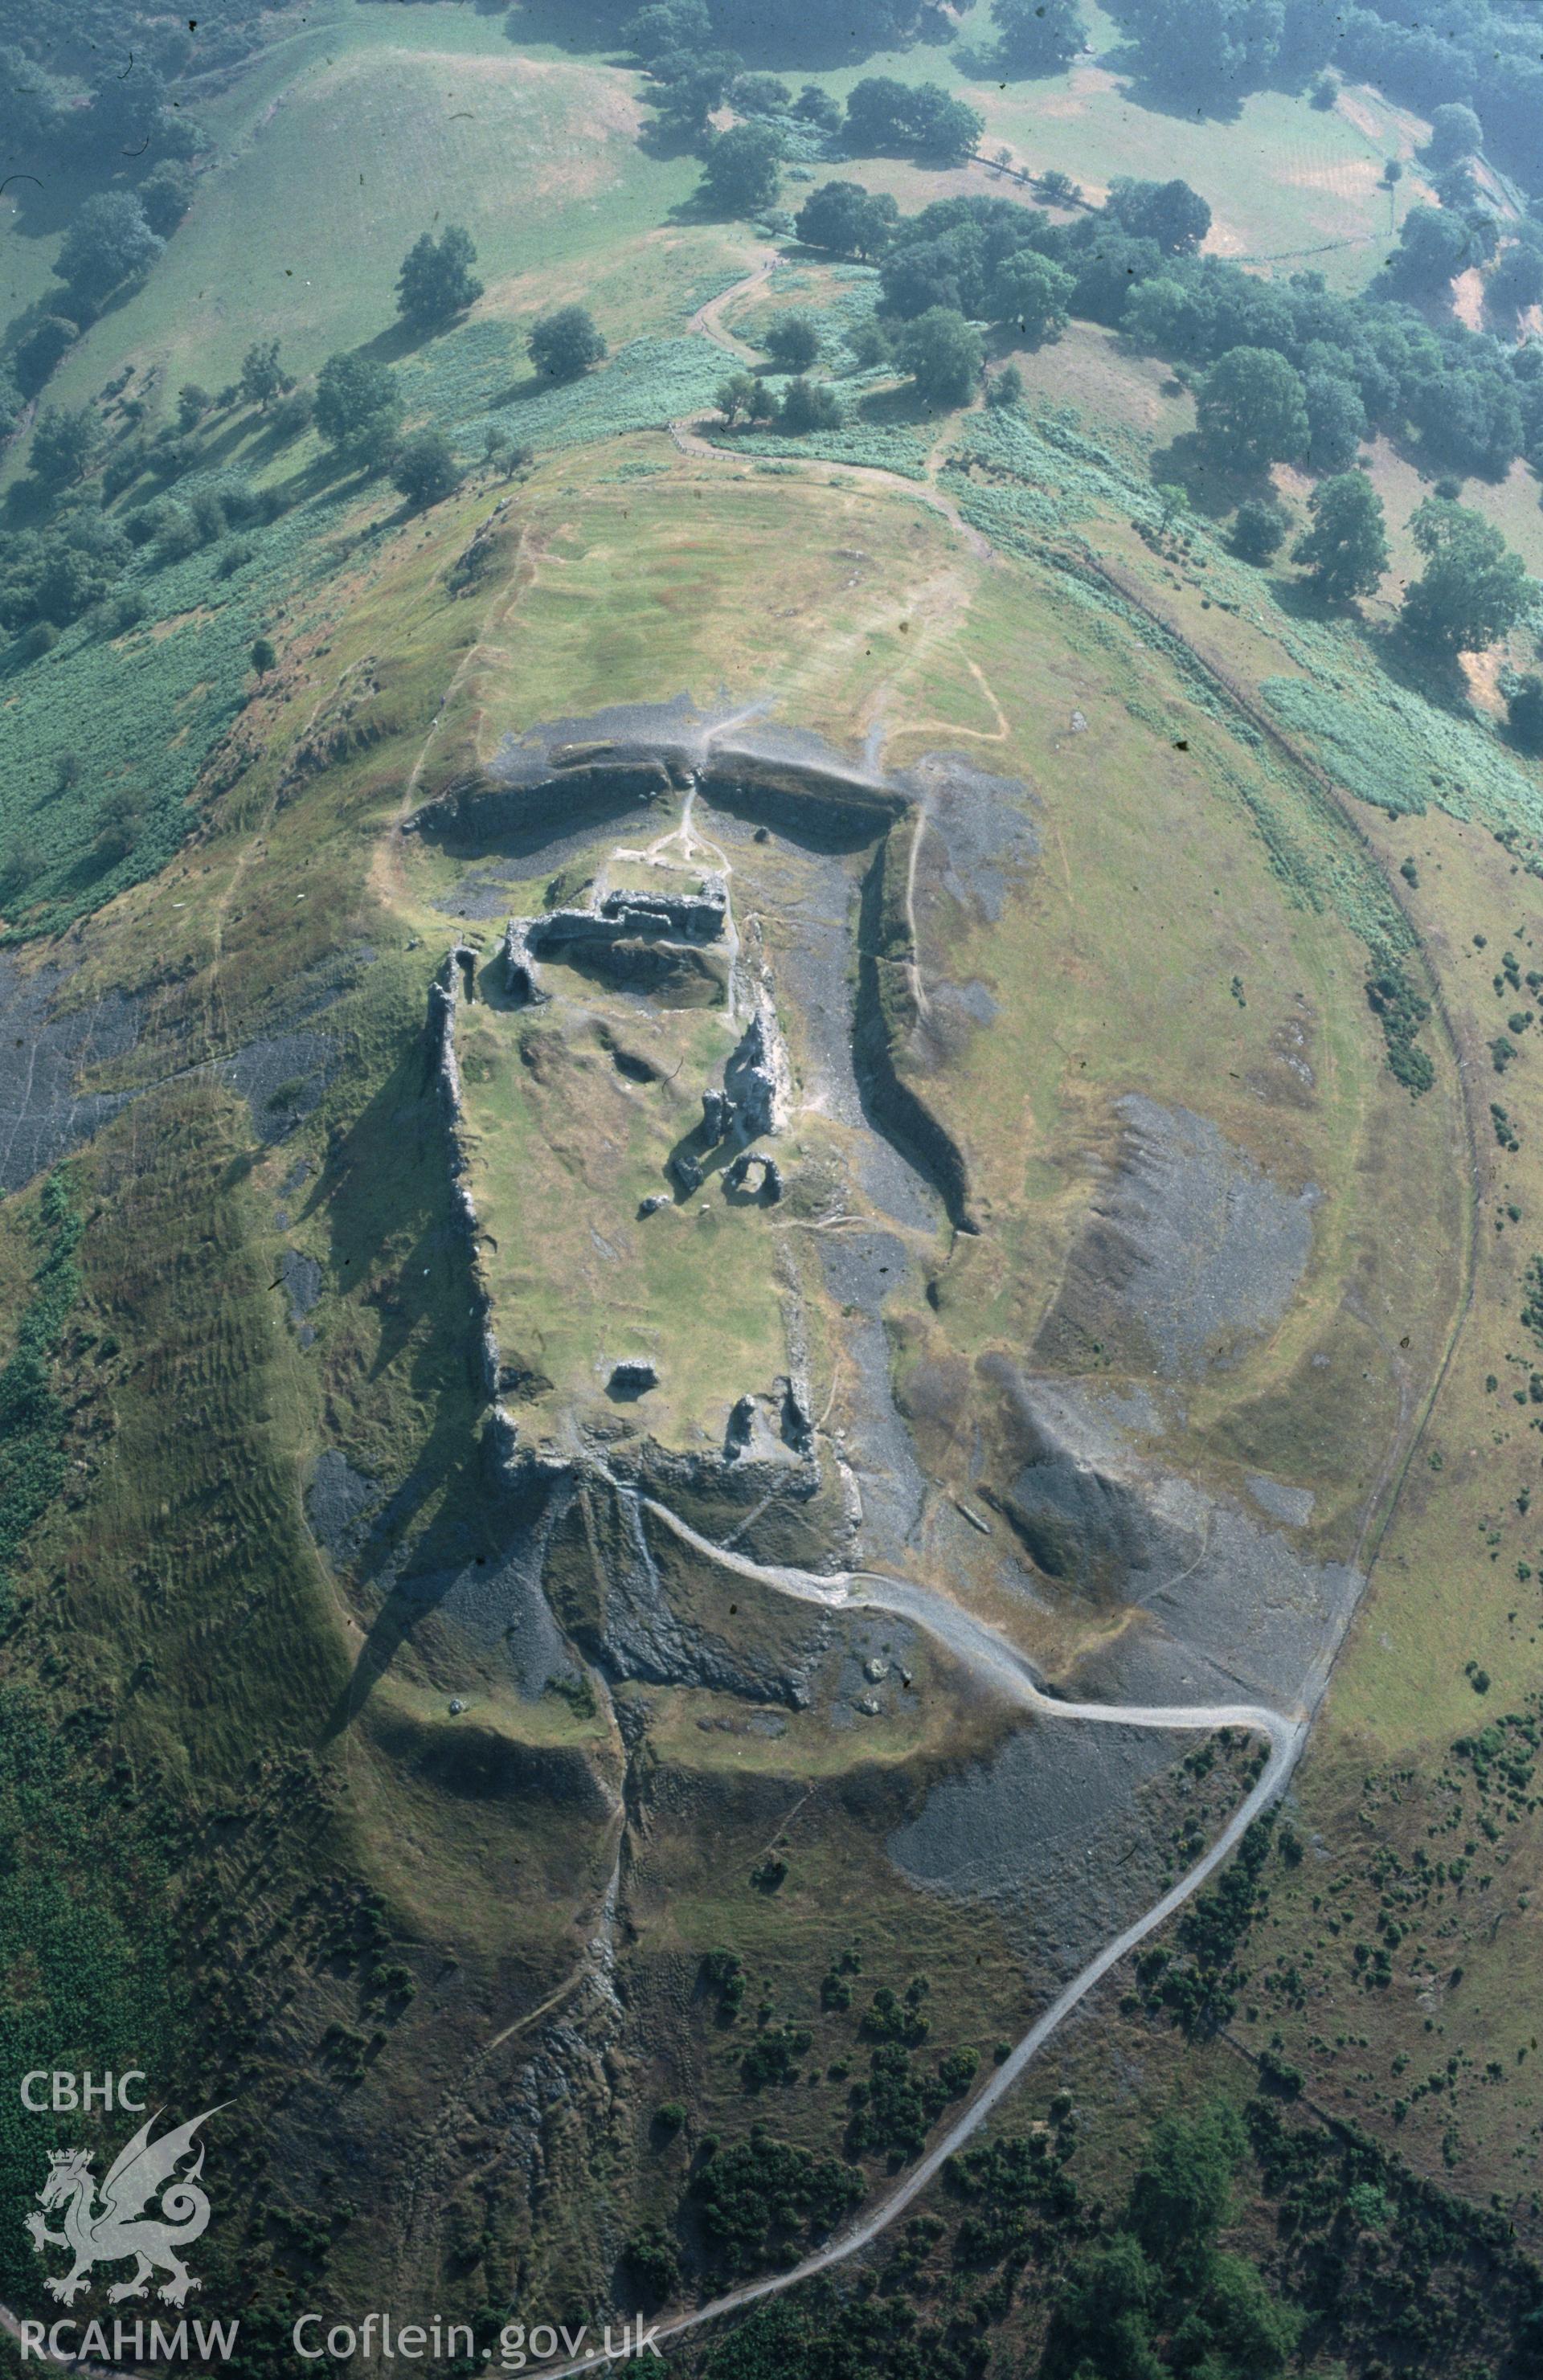 Slide of RCAHMW colour oblique aerial photograph of Castell Dinas Bran, taken by C.R. Musson, 4/8/1996.